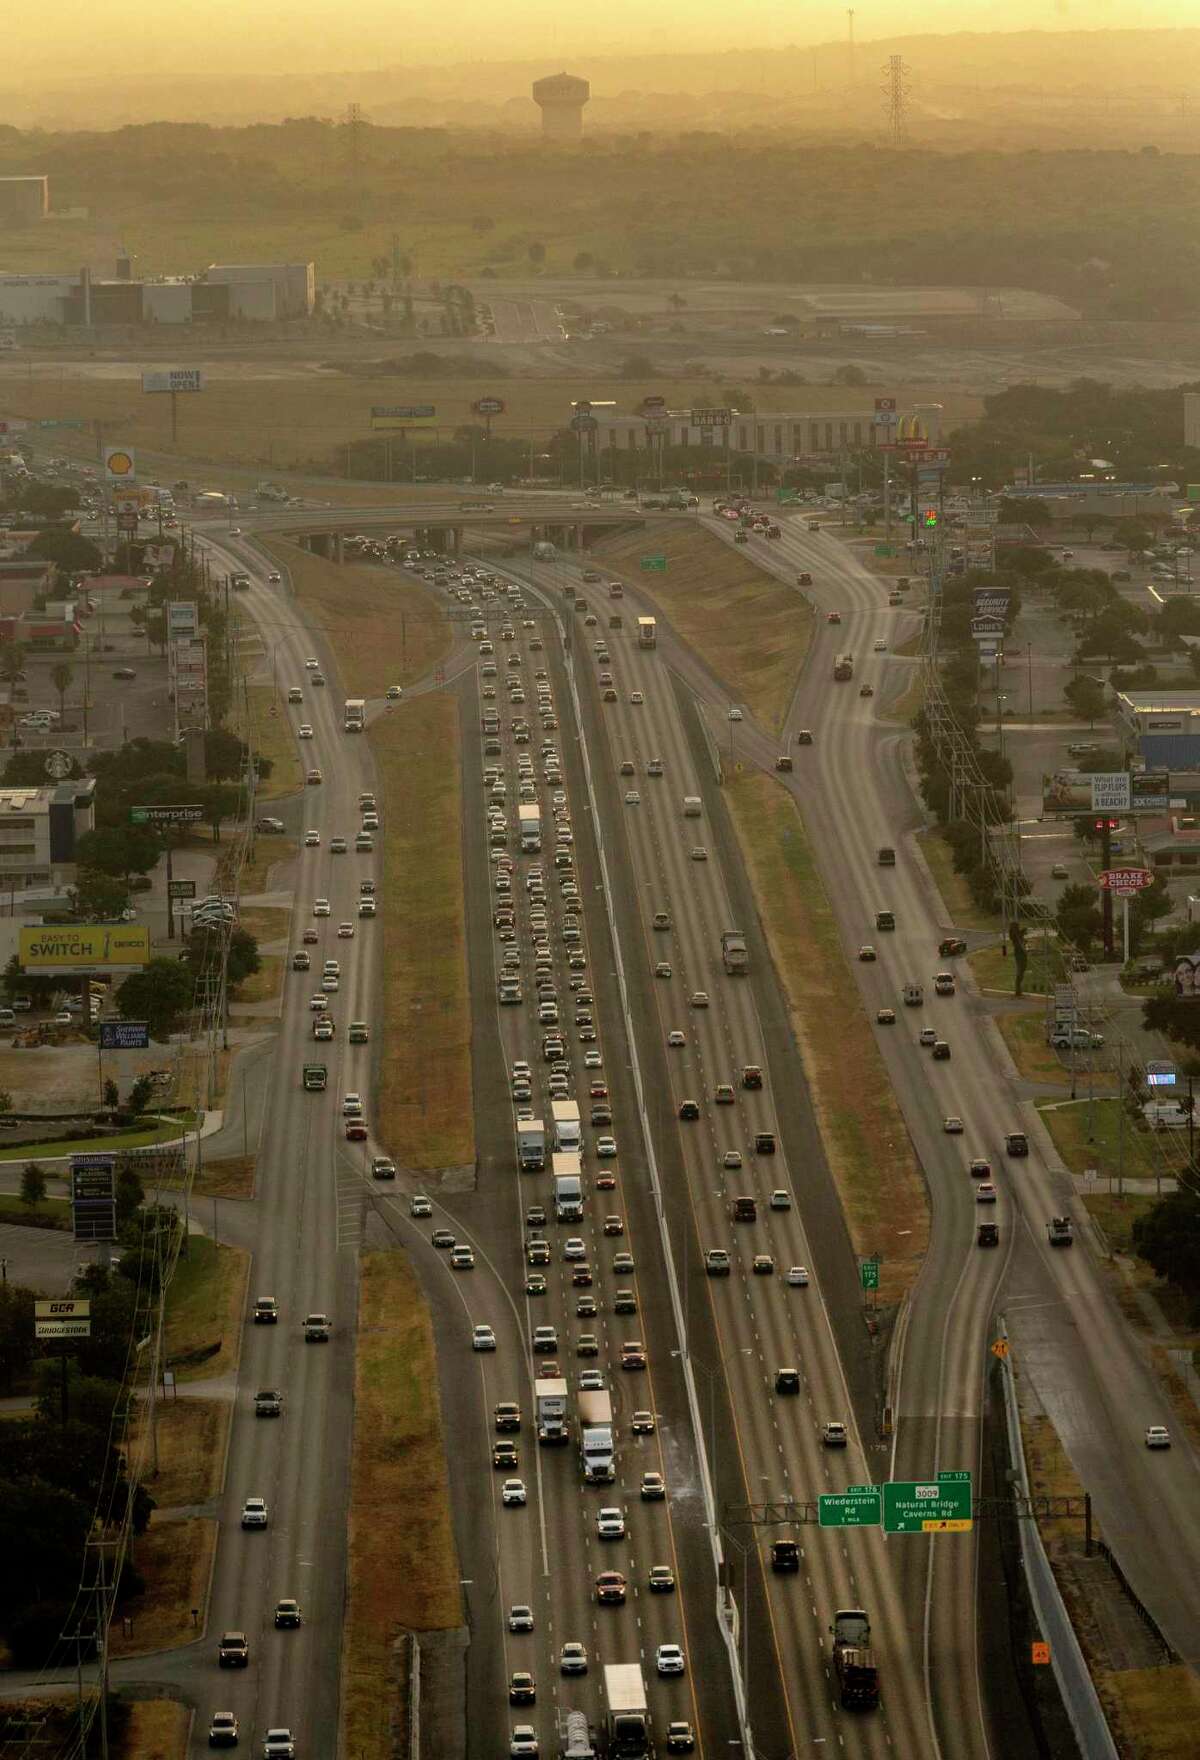 Southbound vehicles fill all the lanes Thursday morning, Aug., 22, 2019 of Interstate 35 on the north side near FM 3009 during morning rush hour. The Texas Department of Transportation has unveiled plans for a 20-mile expansion of I-35 north of Loop 410, including this section, that would make the state’s busiest stretch of interstate a limited-access, non-tolled, double-decked highway through Selma and Schertz.